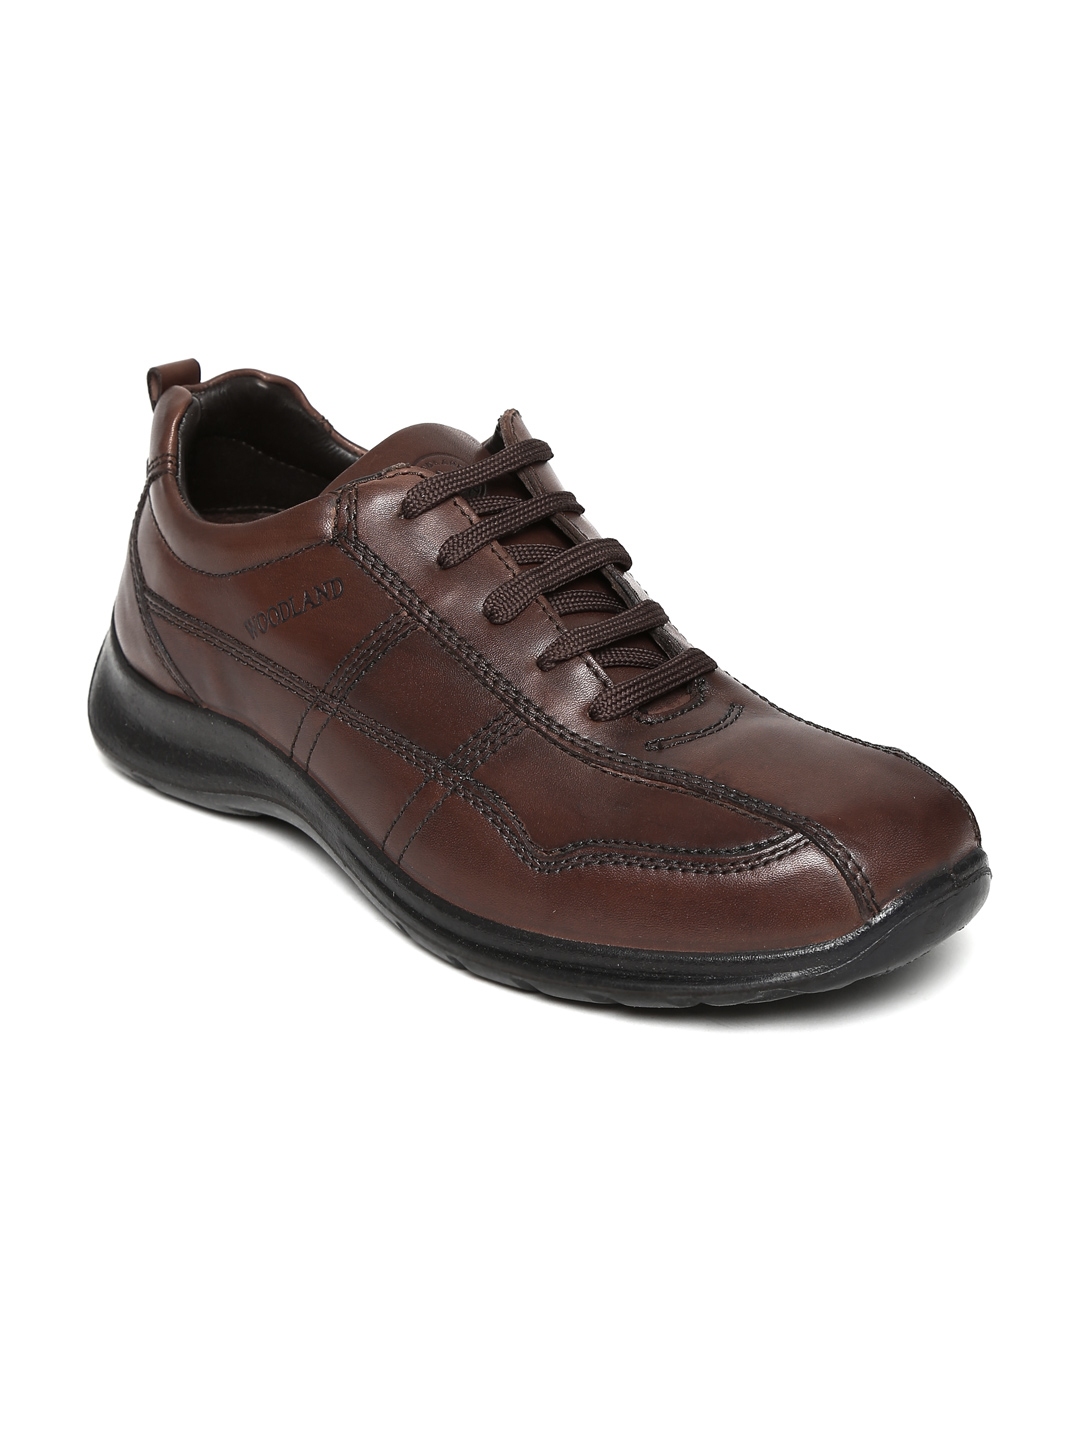 Buy Woodland Men Dark Brown Leather Casual Shoes - Casual Shoes for Men ...